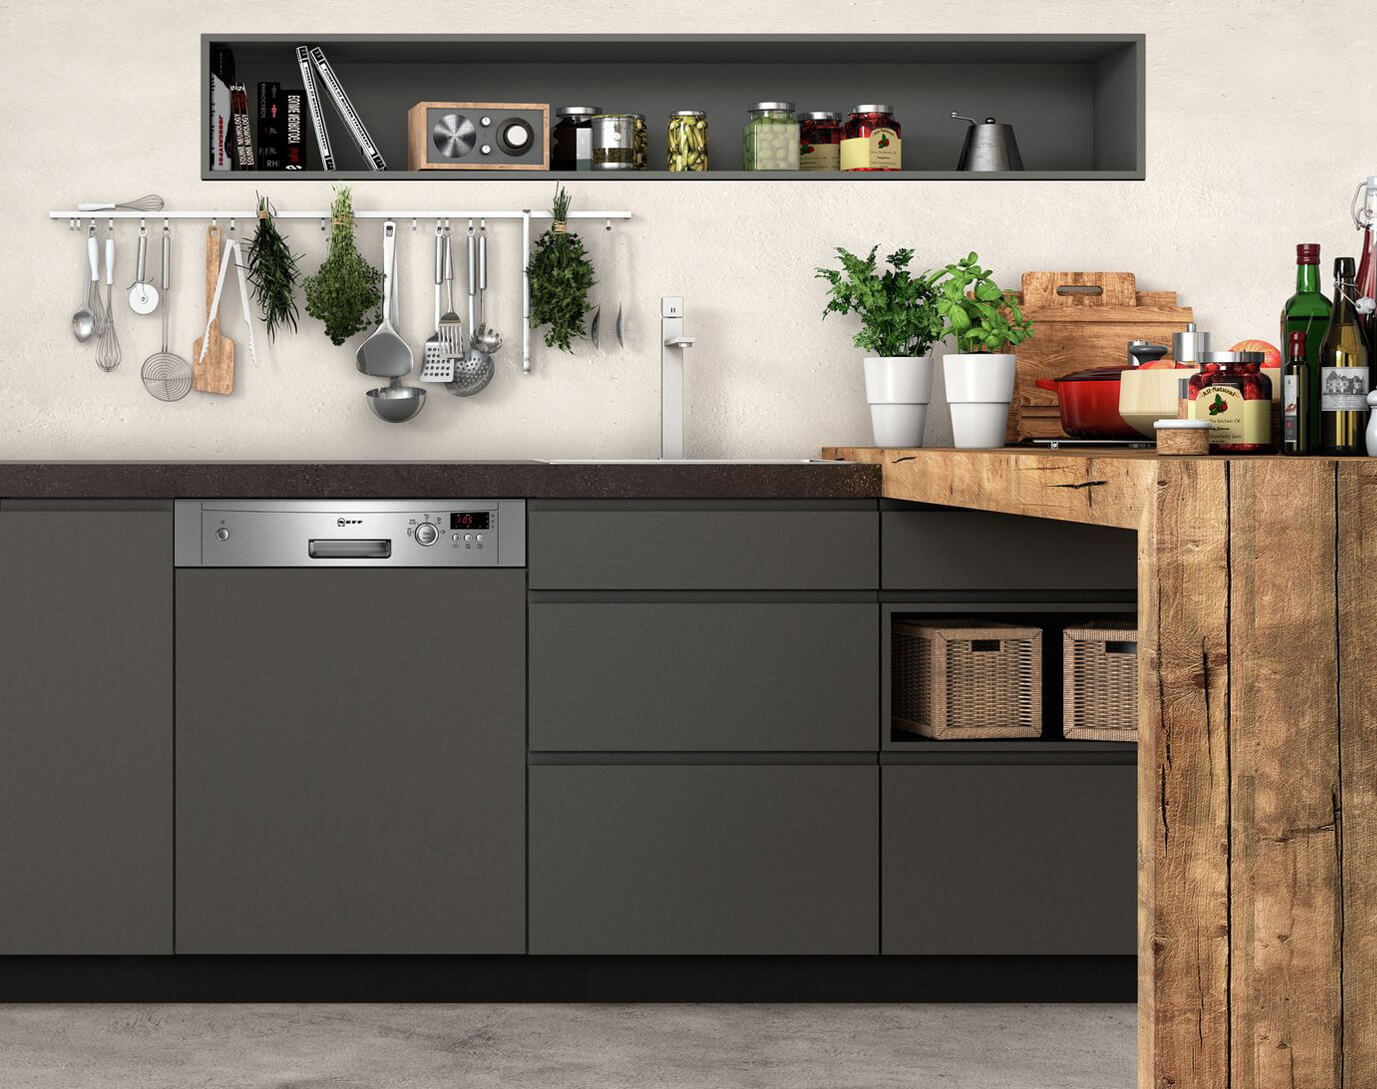 top 3 kitchen appliances for 2022: our recommendations